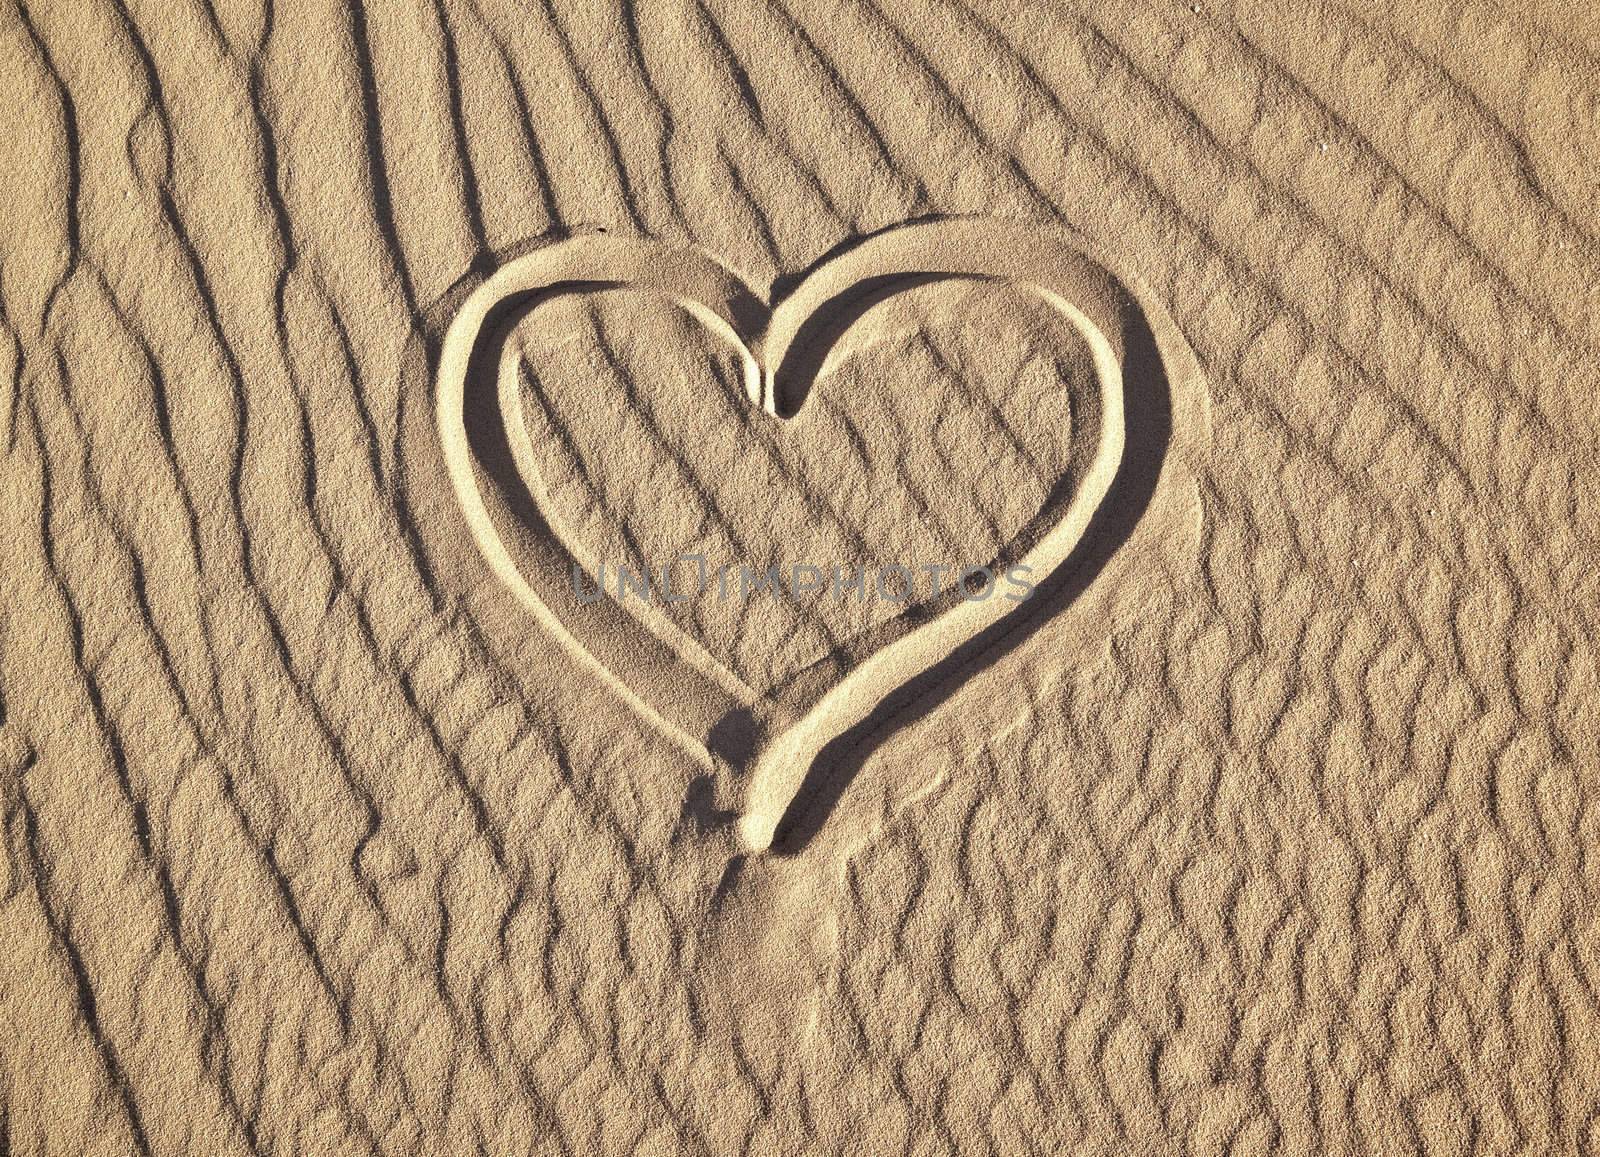 A photography of a heart in the sand